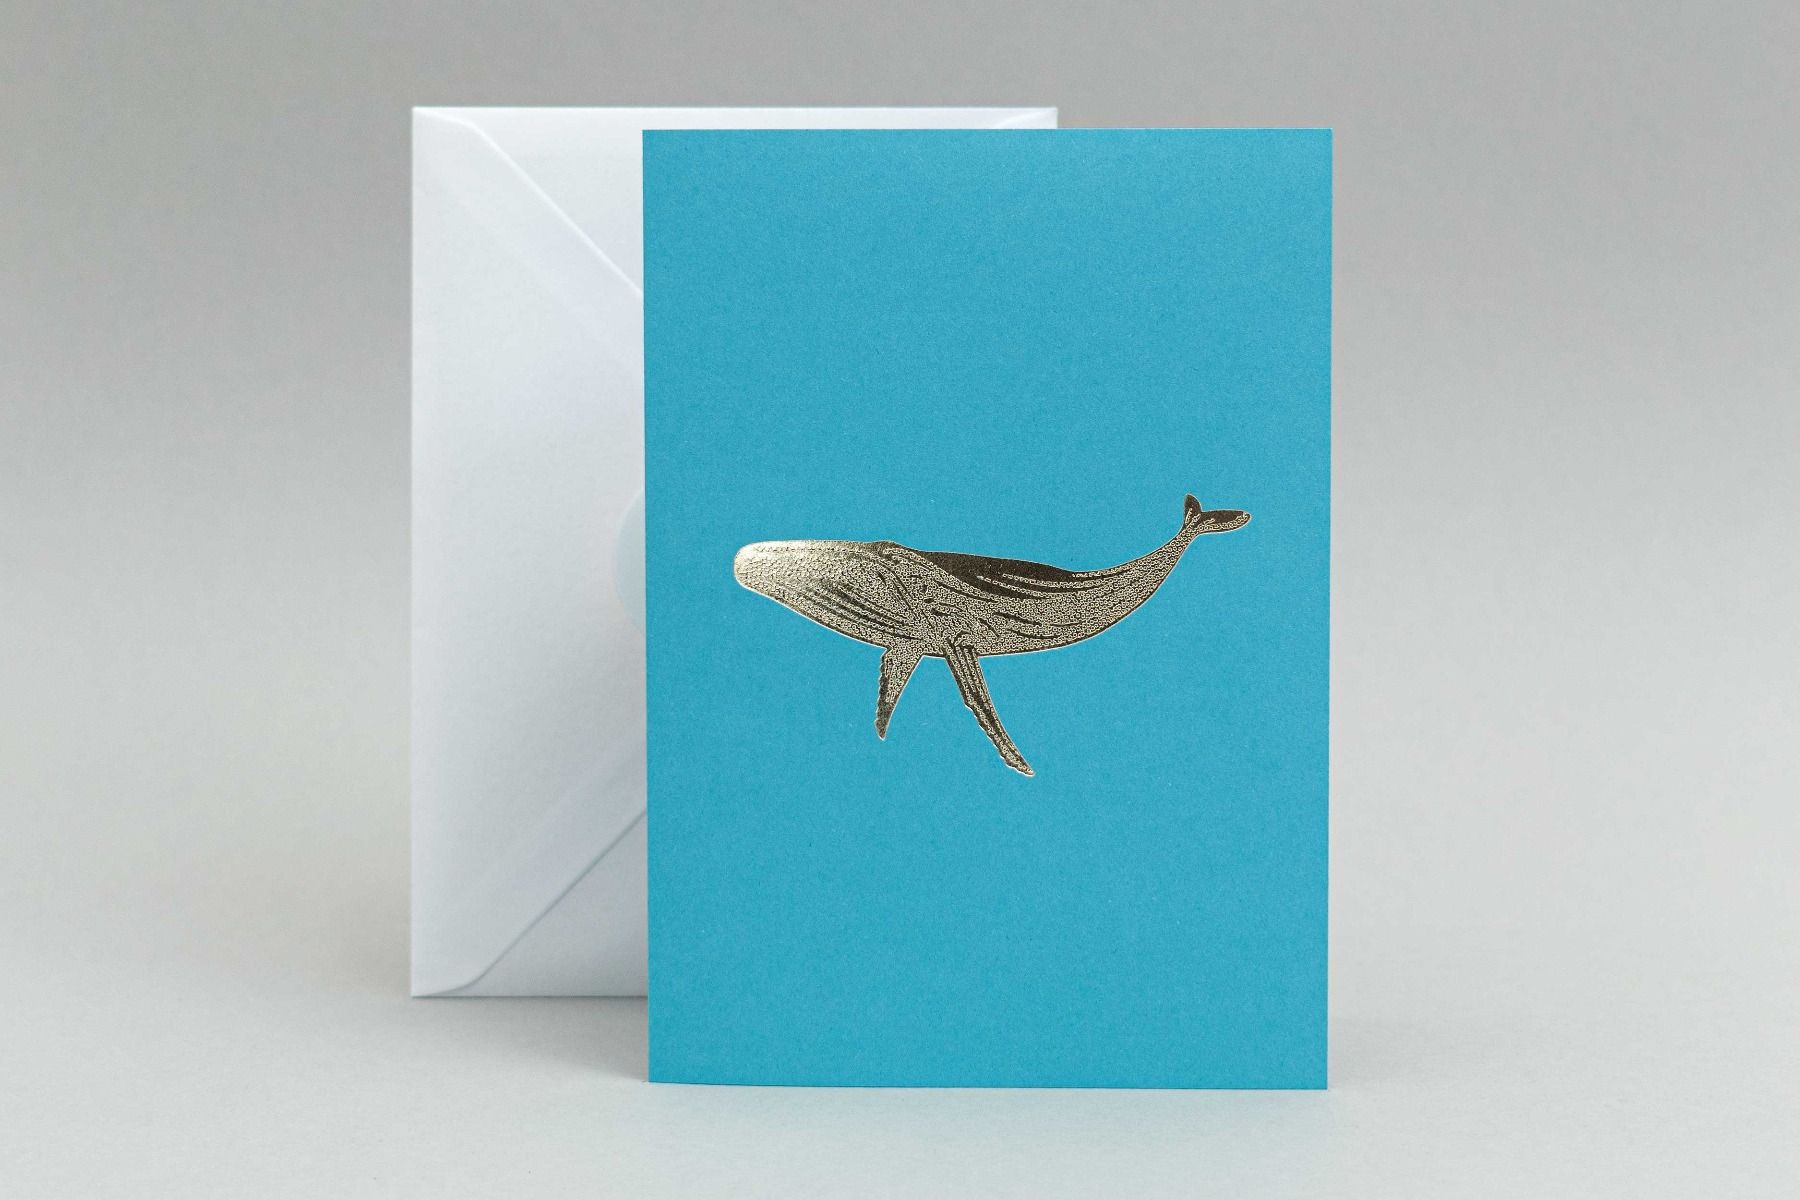 Silver Foil whale note card on ecofriendly blue card stock.